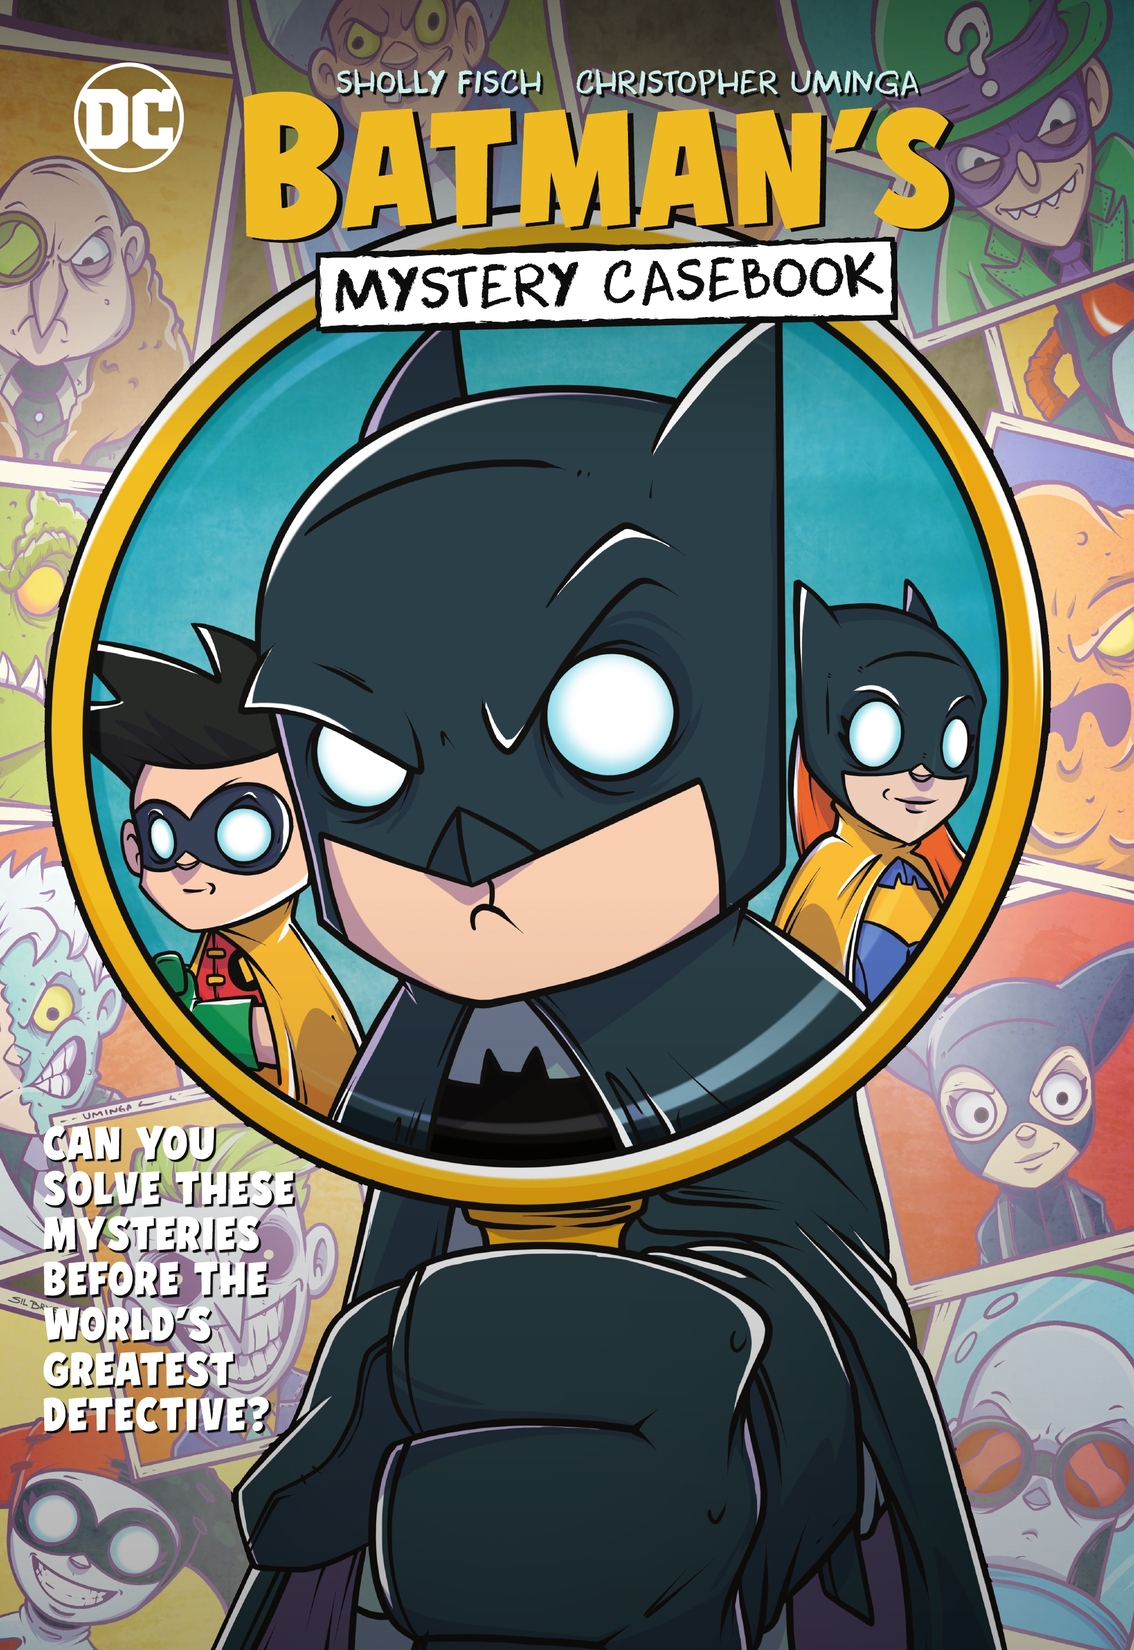 Batman's Mystery Casebook preview images